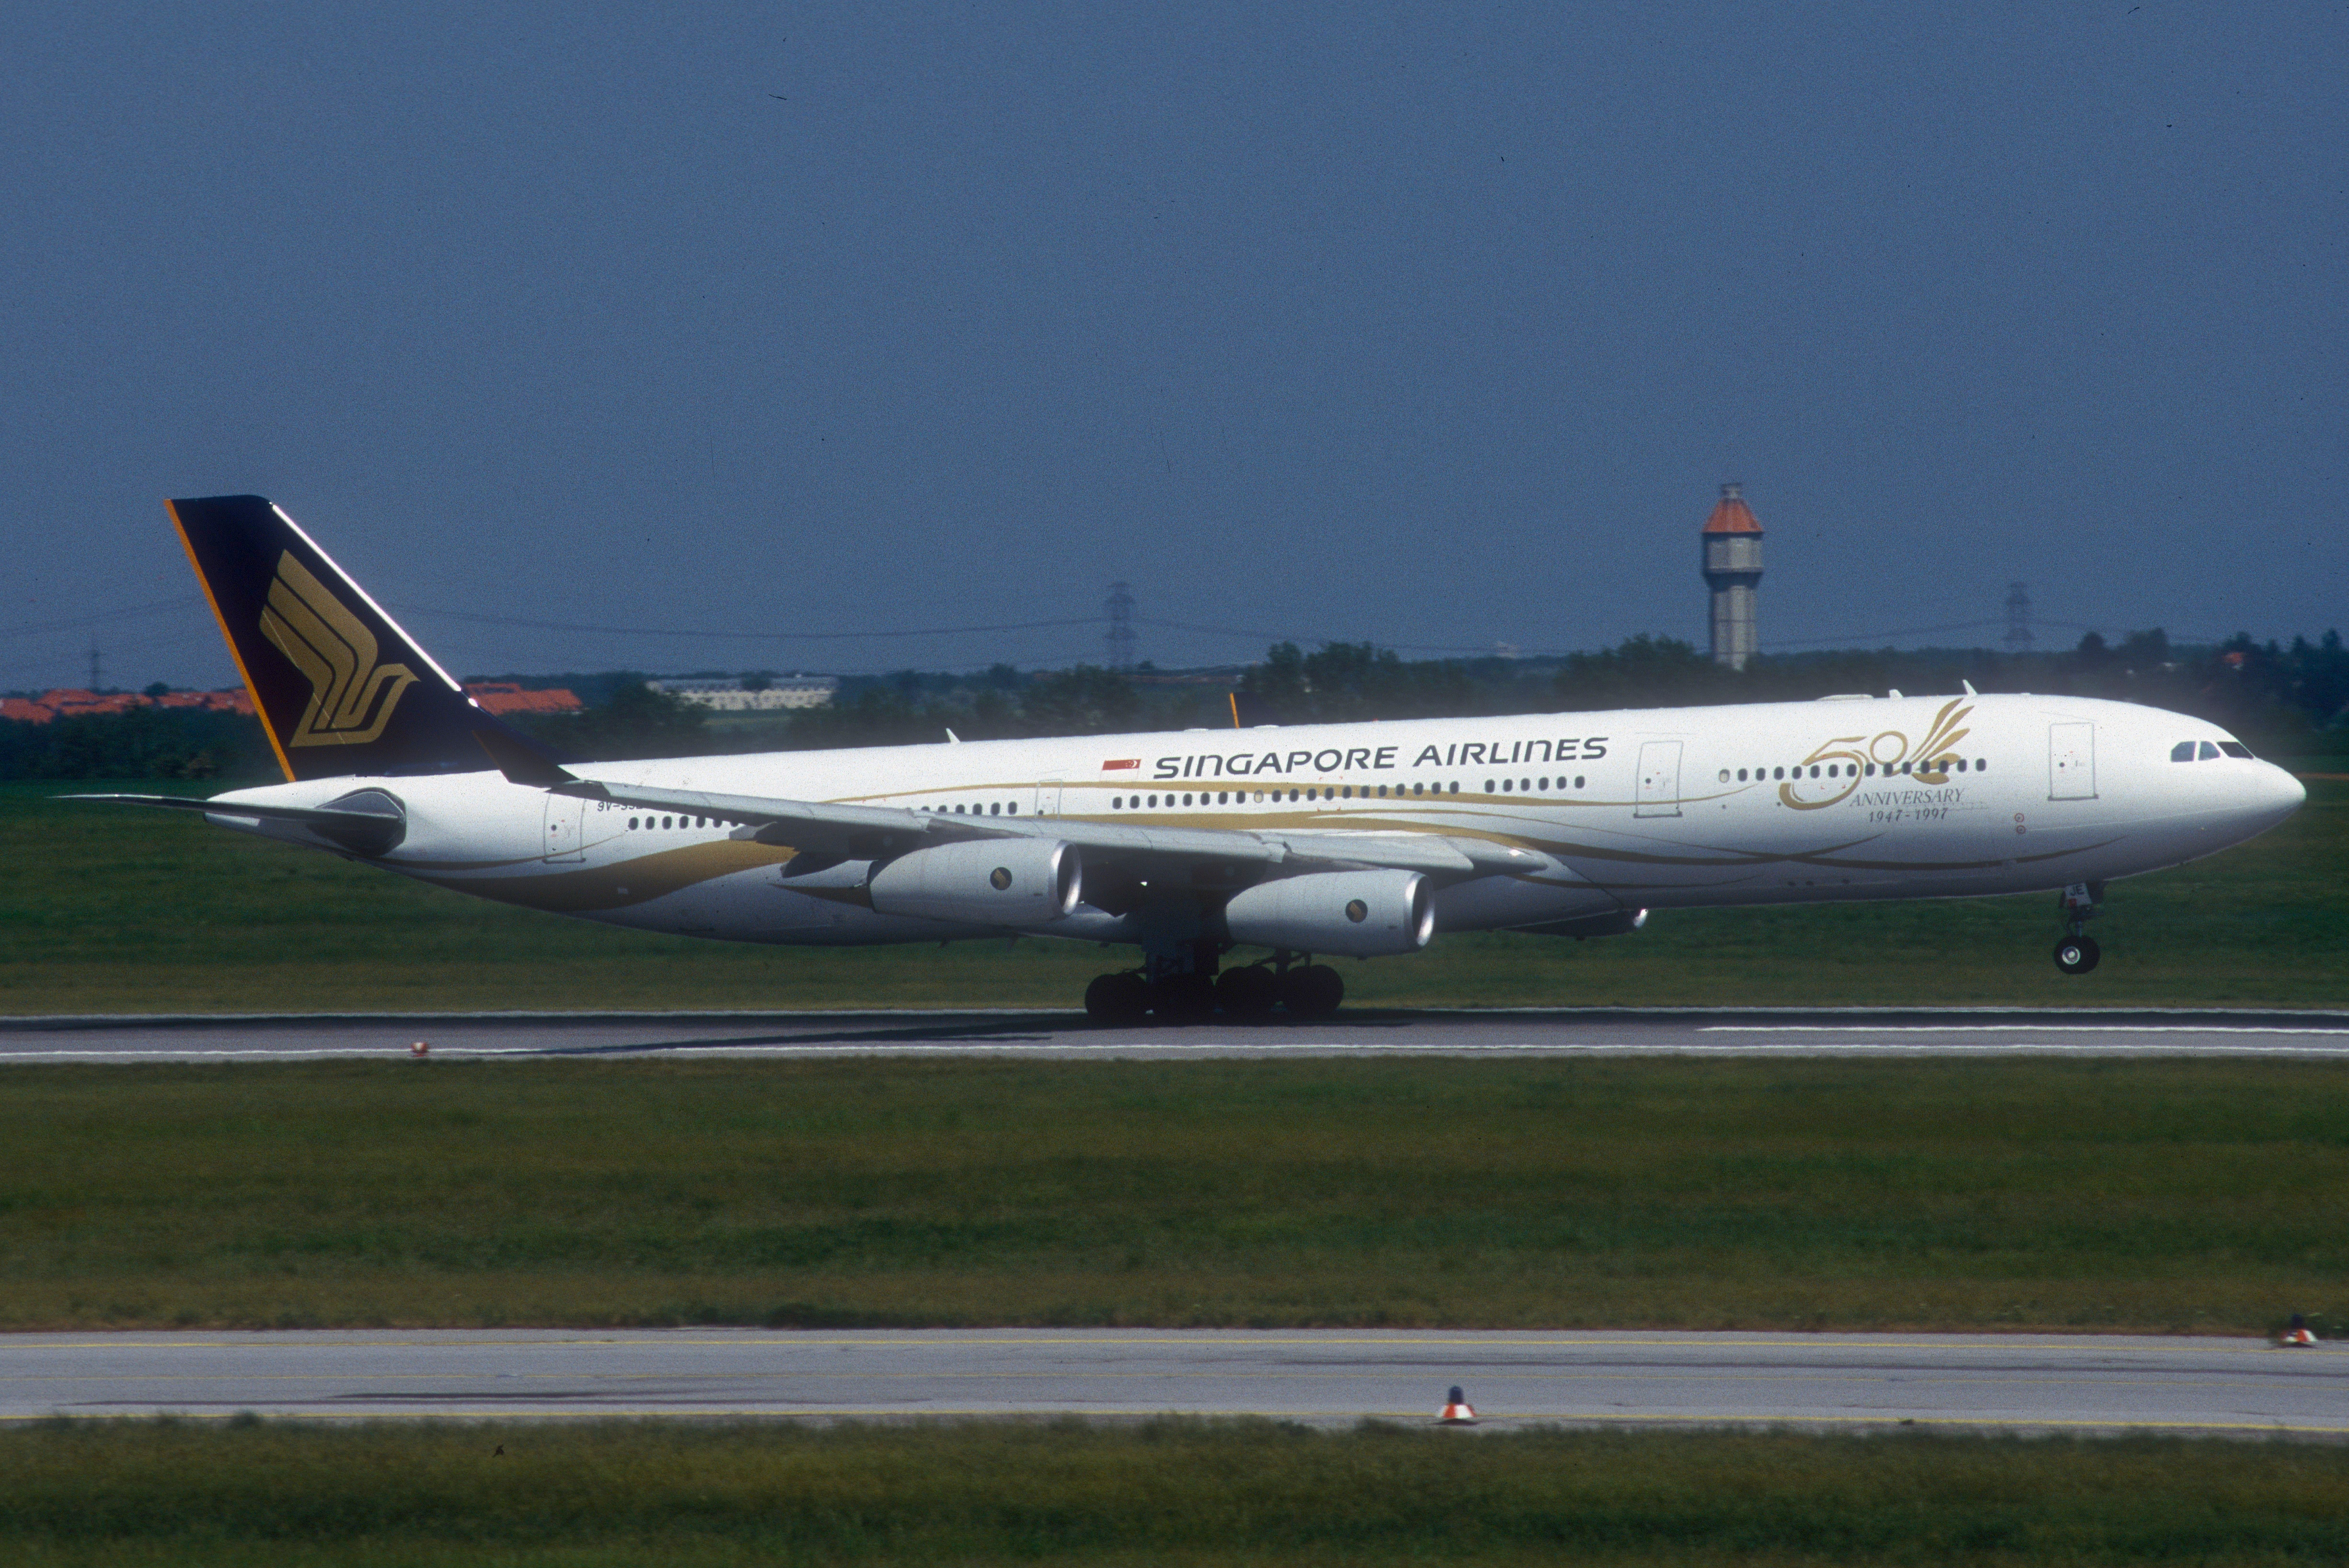 A Singapore Airlines A340-300 just about to take off.